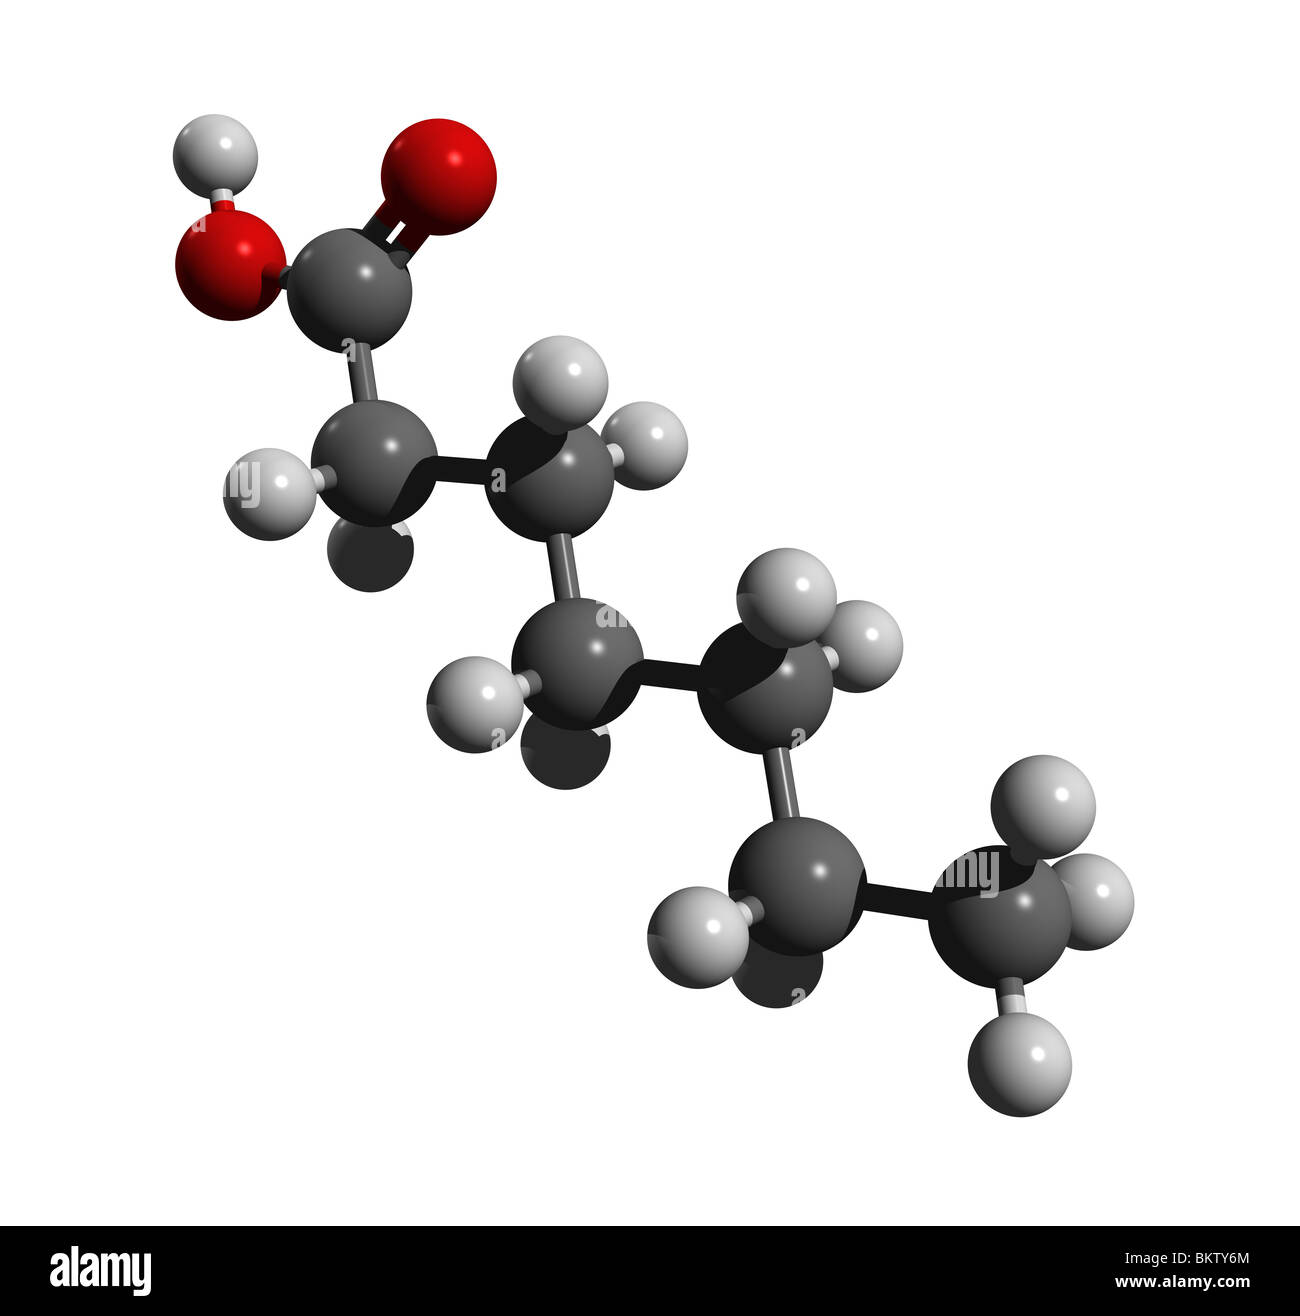 Heptanoic acid (colorcode: black=carbon, white=hydrogen, red=oxygen) Stock Photo